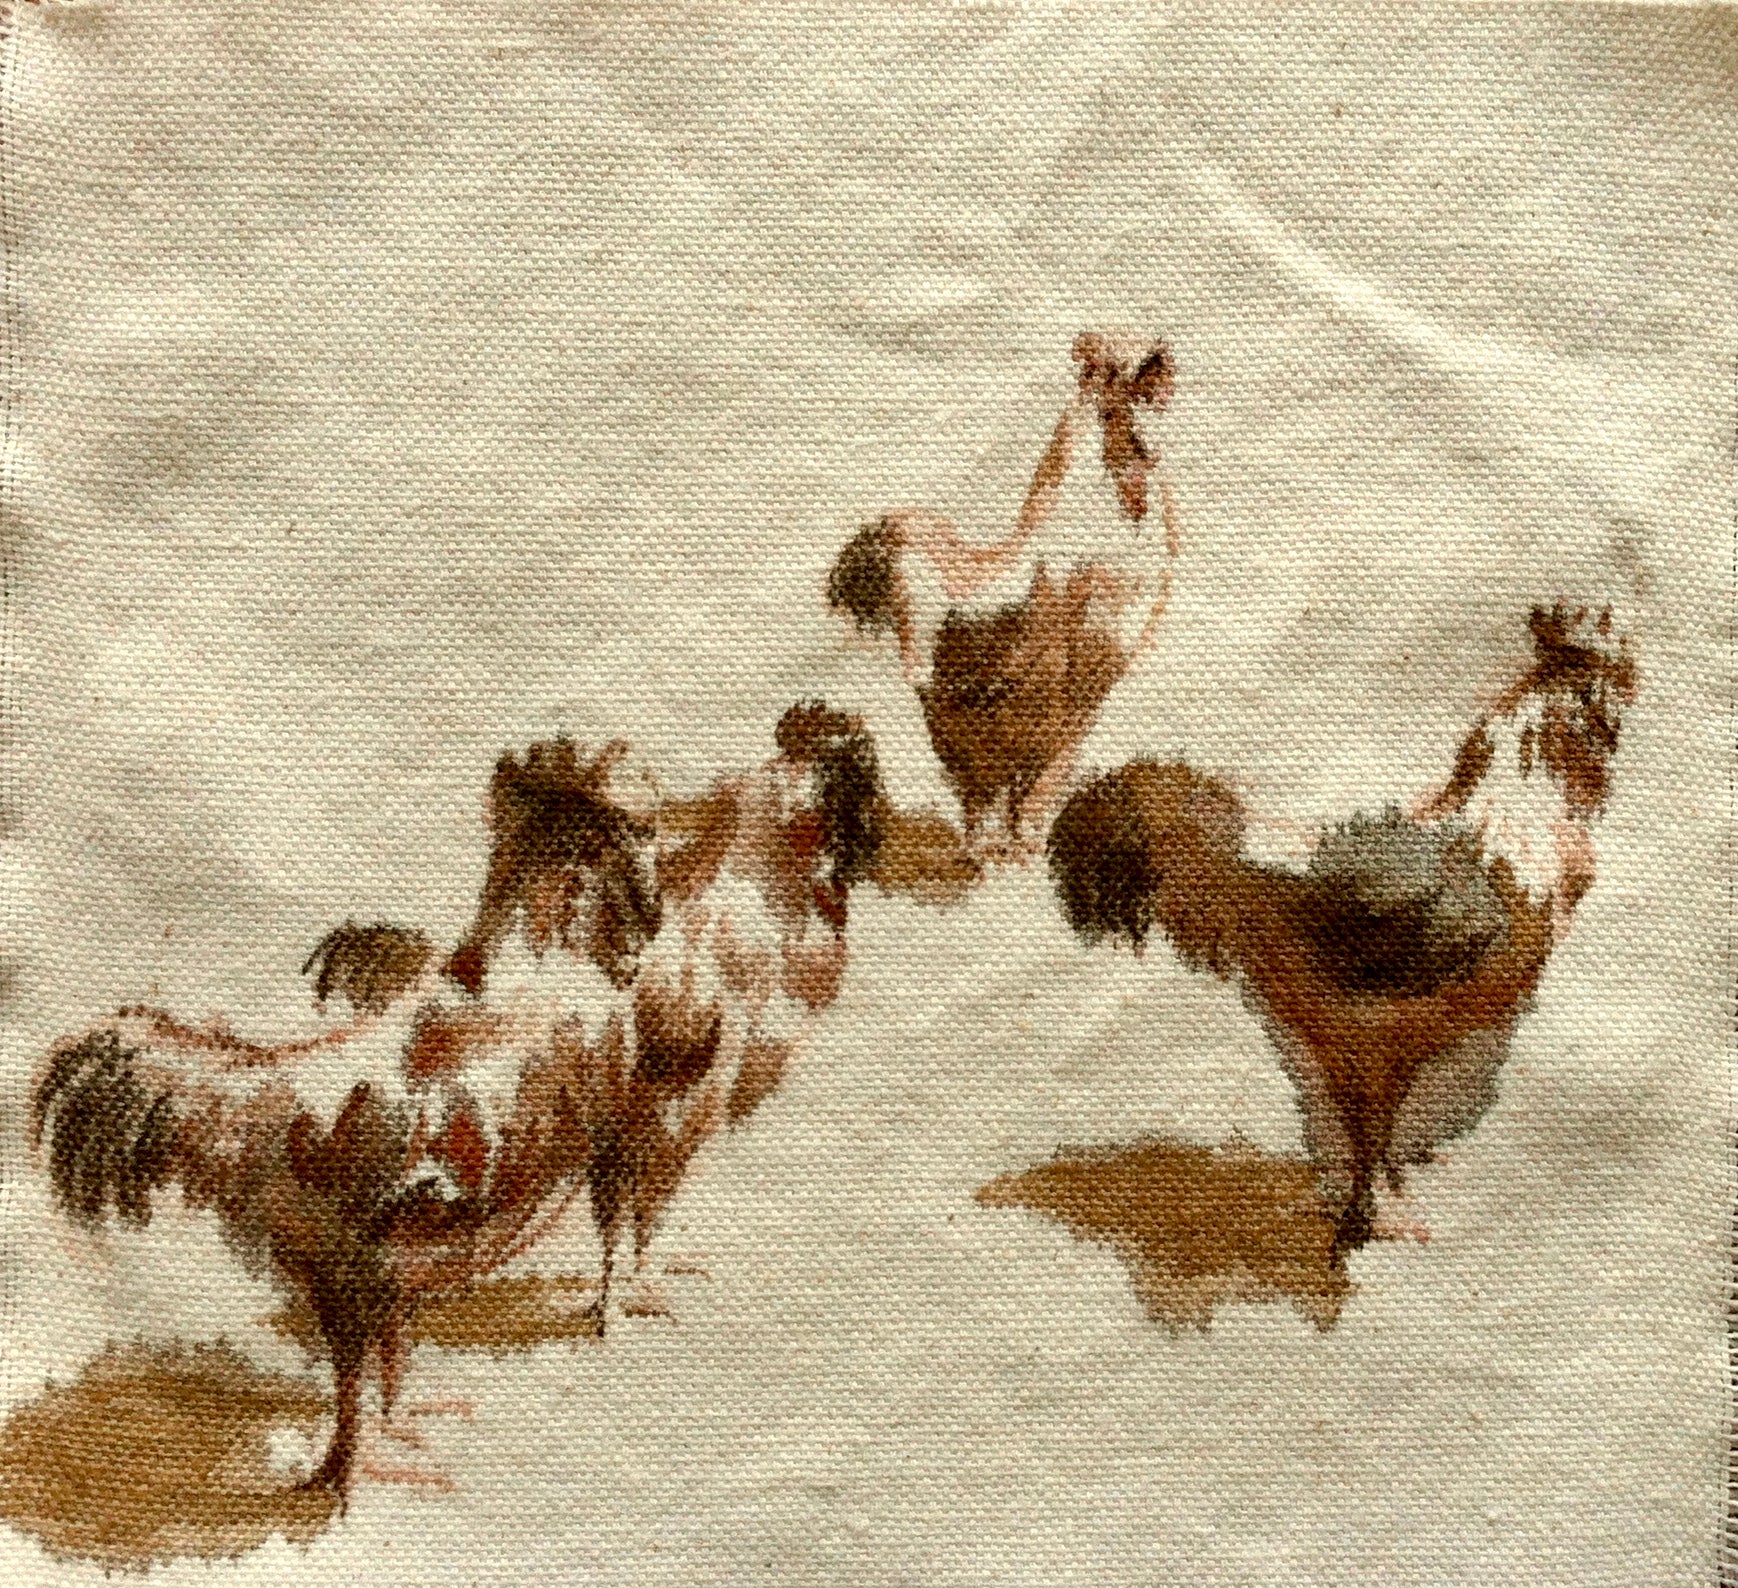 Business in China, 2014 - Roosters, Sold